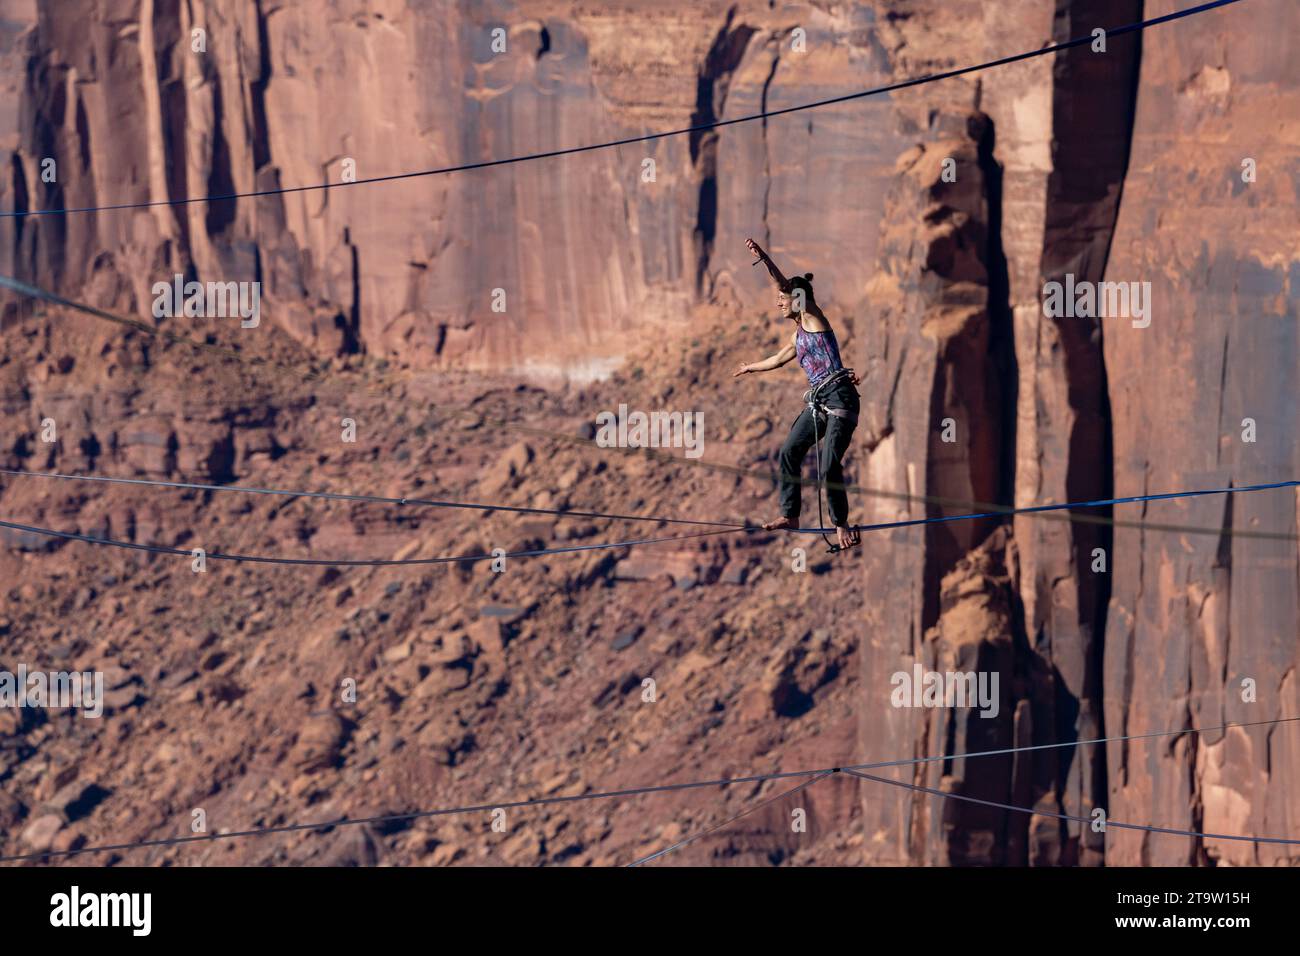 A woman walks the highline 500 feet above Mineral Canyon at the GGBY World Highline Festival near Moab, Utah. Stock Photo